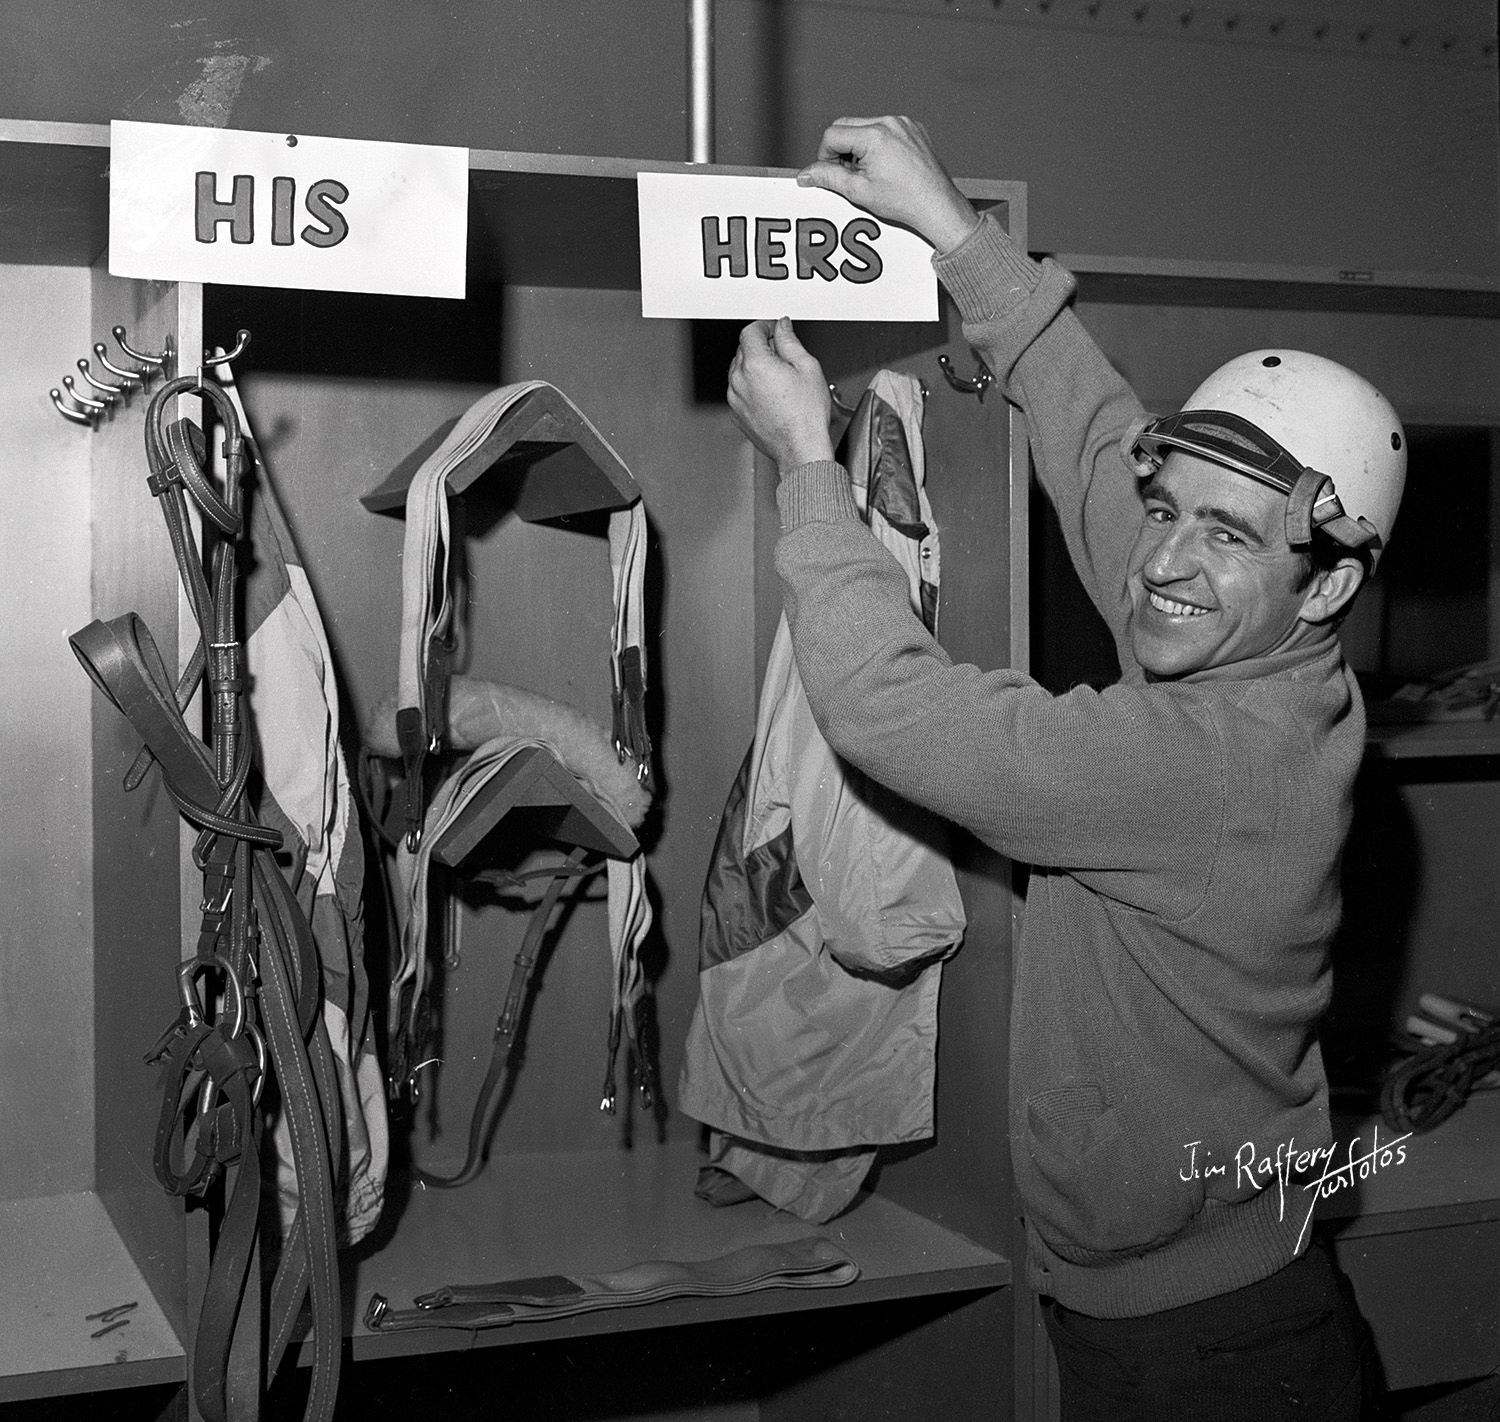 Bobby Ussery with "His" and "Hers" signs, Jan. 13, 1969 (Jim Raftery Turfotos)